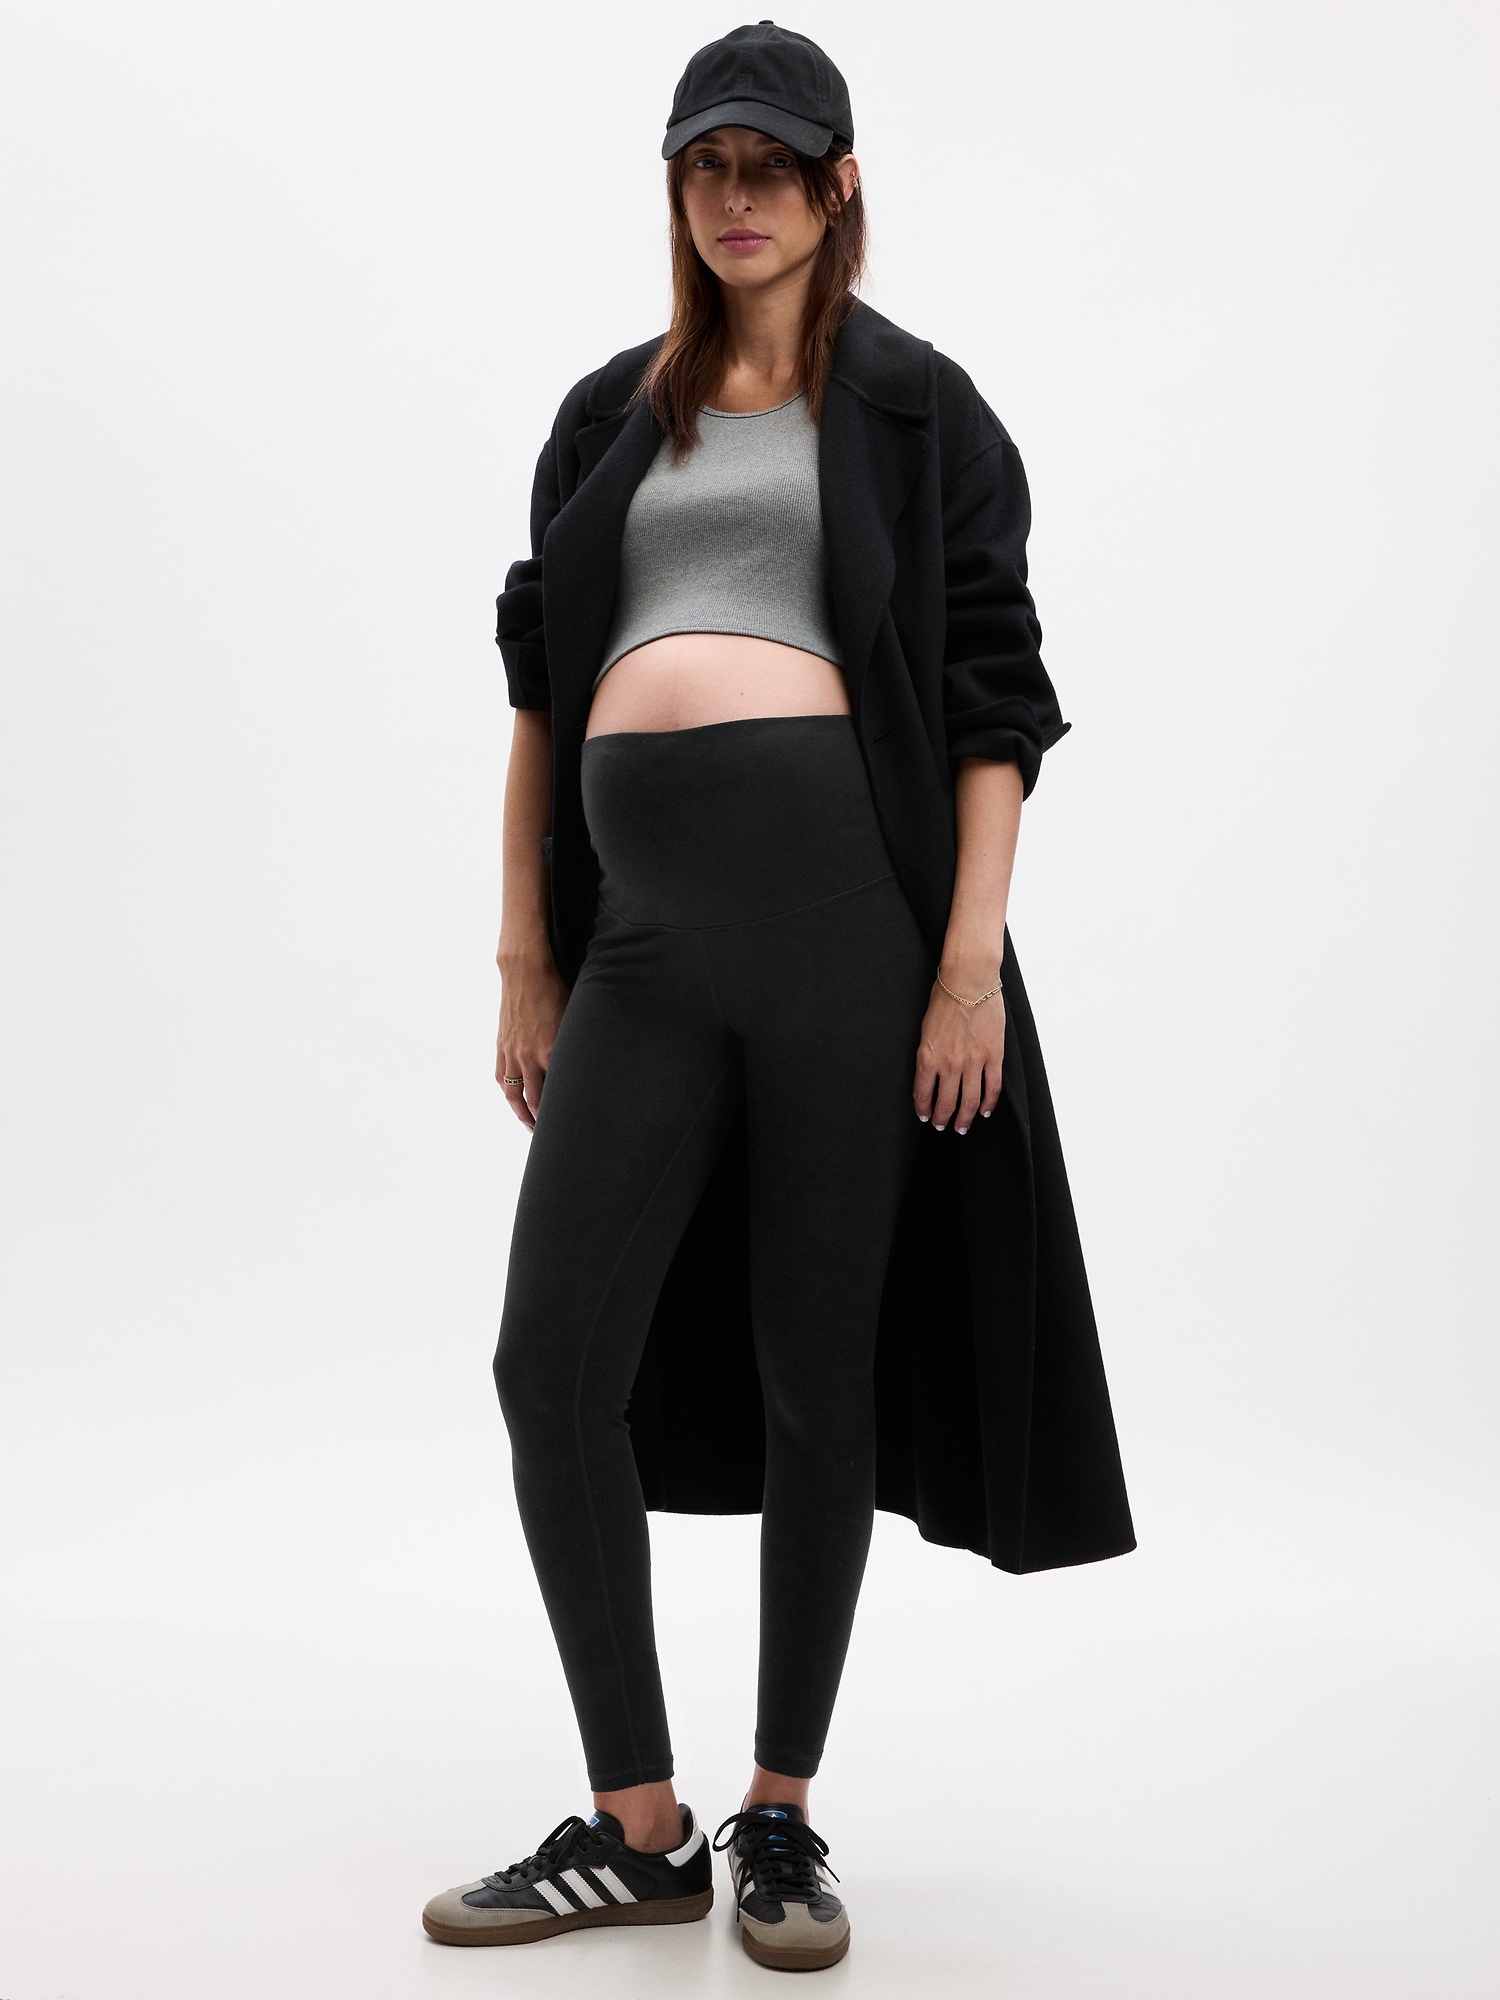 GapFit Maternity Sculpt Compression athletic leggings Size undefined - $22  - From Lindsey